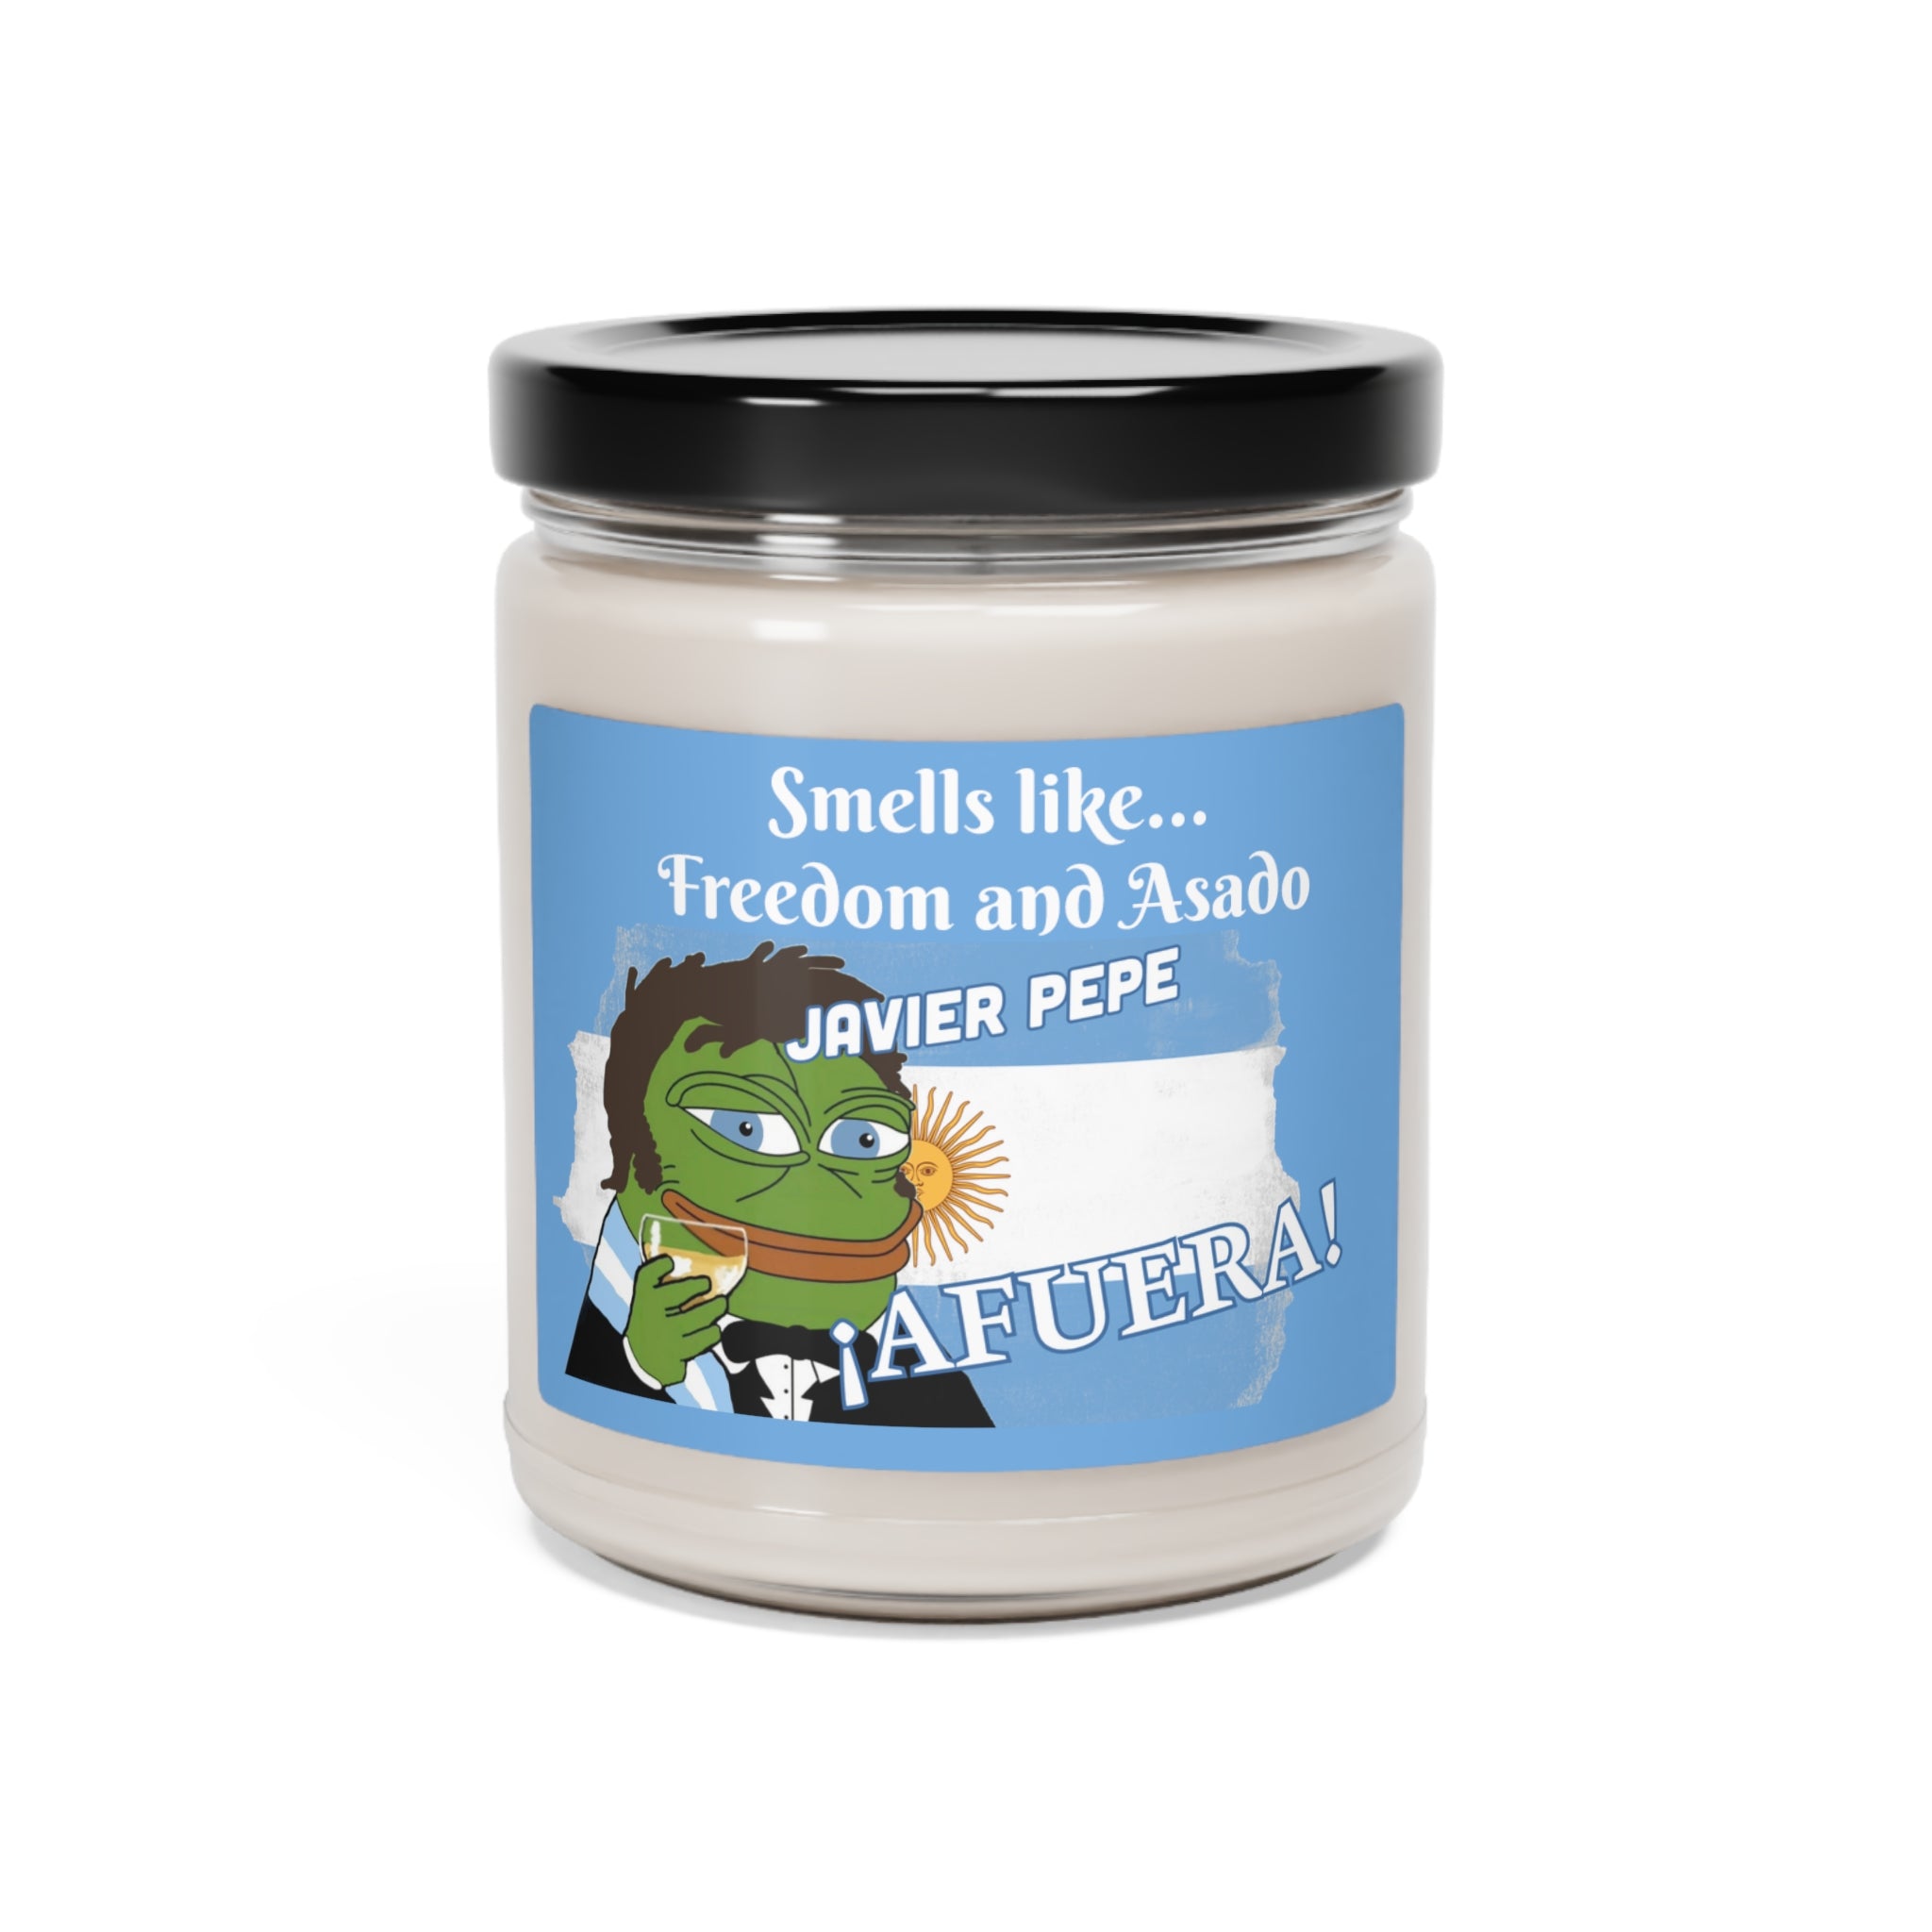 Javier Milei Pepe "Freedom and Asado" Scented Soy Candle, 9oz